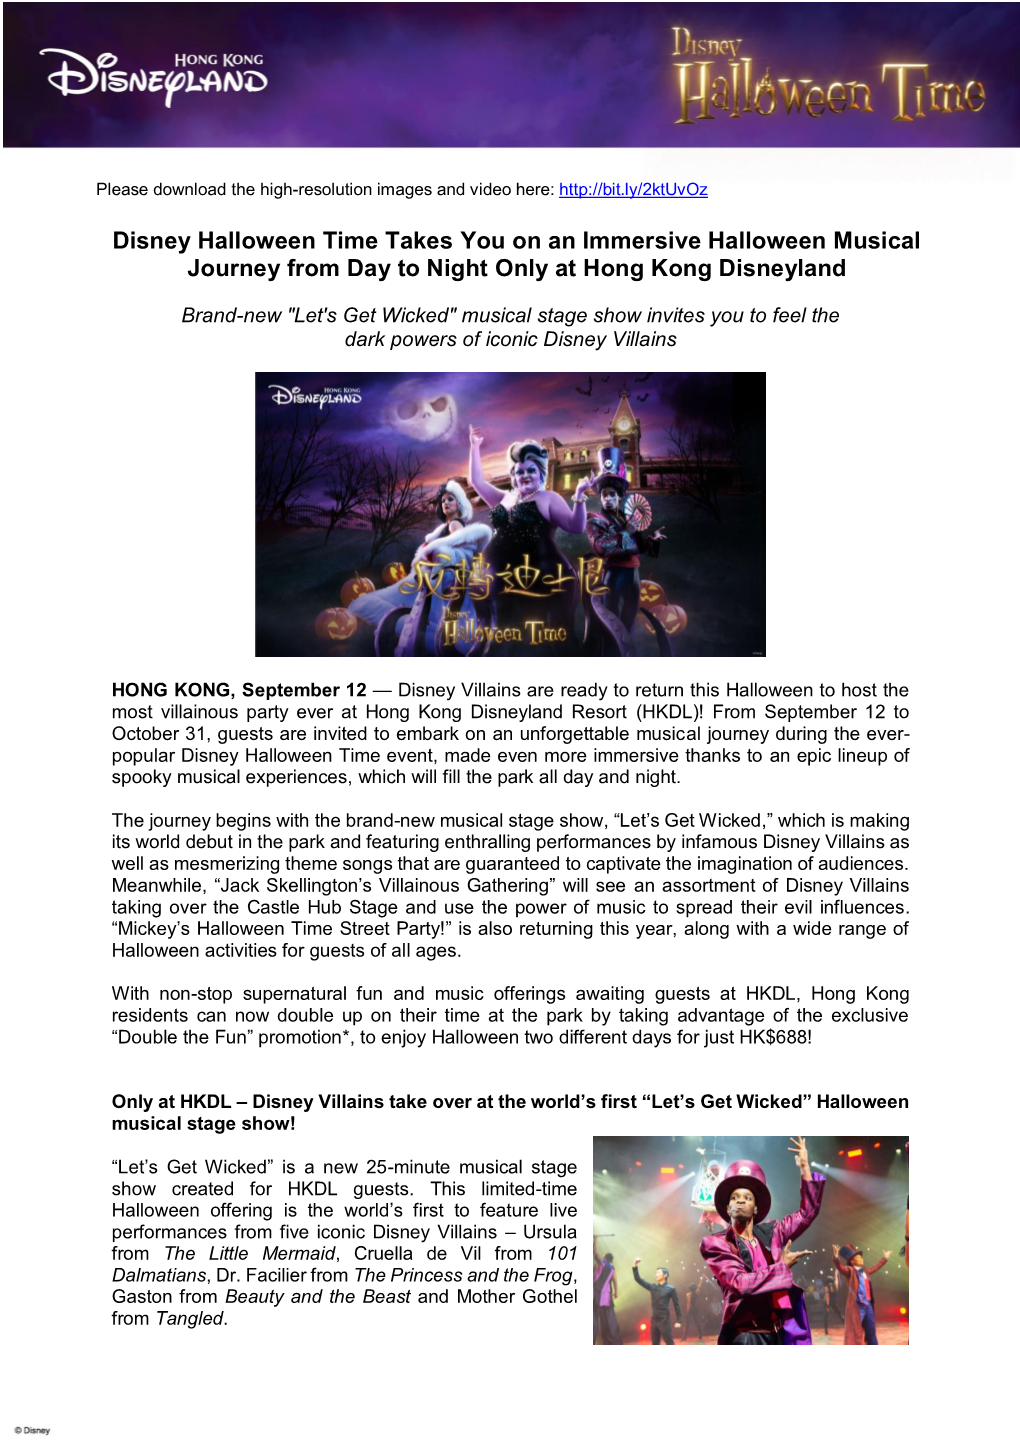 Disney Halloween Time Takes You on an Immersive Halloween Musical Journey from Day to Night Only at Hong Kong Disneyland